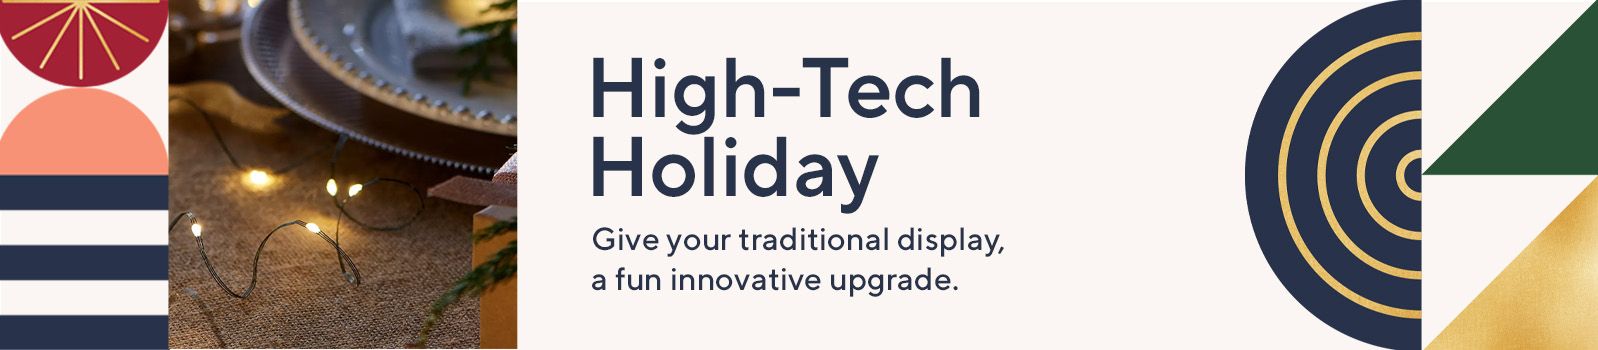 High-Tech Holiday Give your traditional display a fun, innovative upgrade.